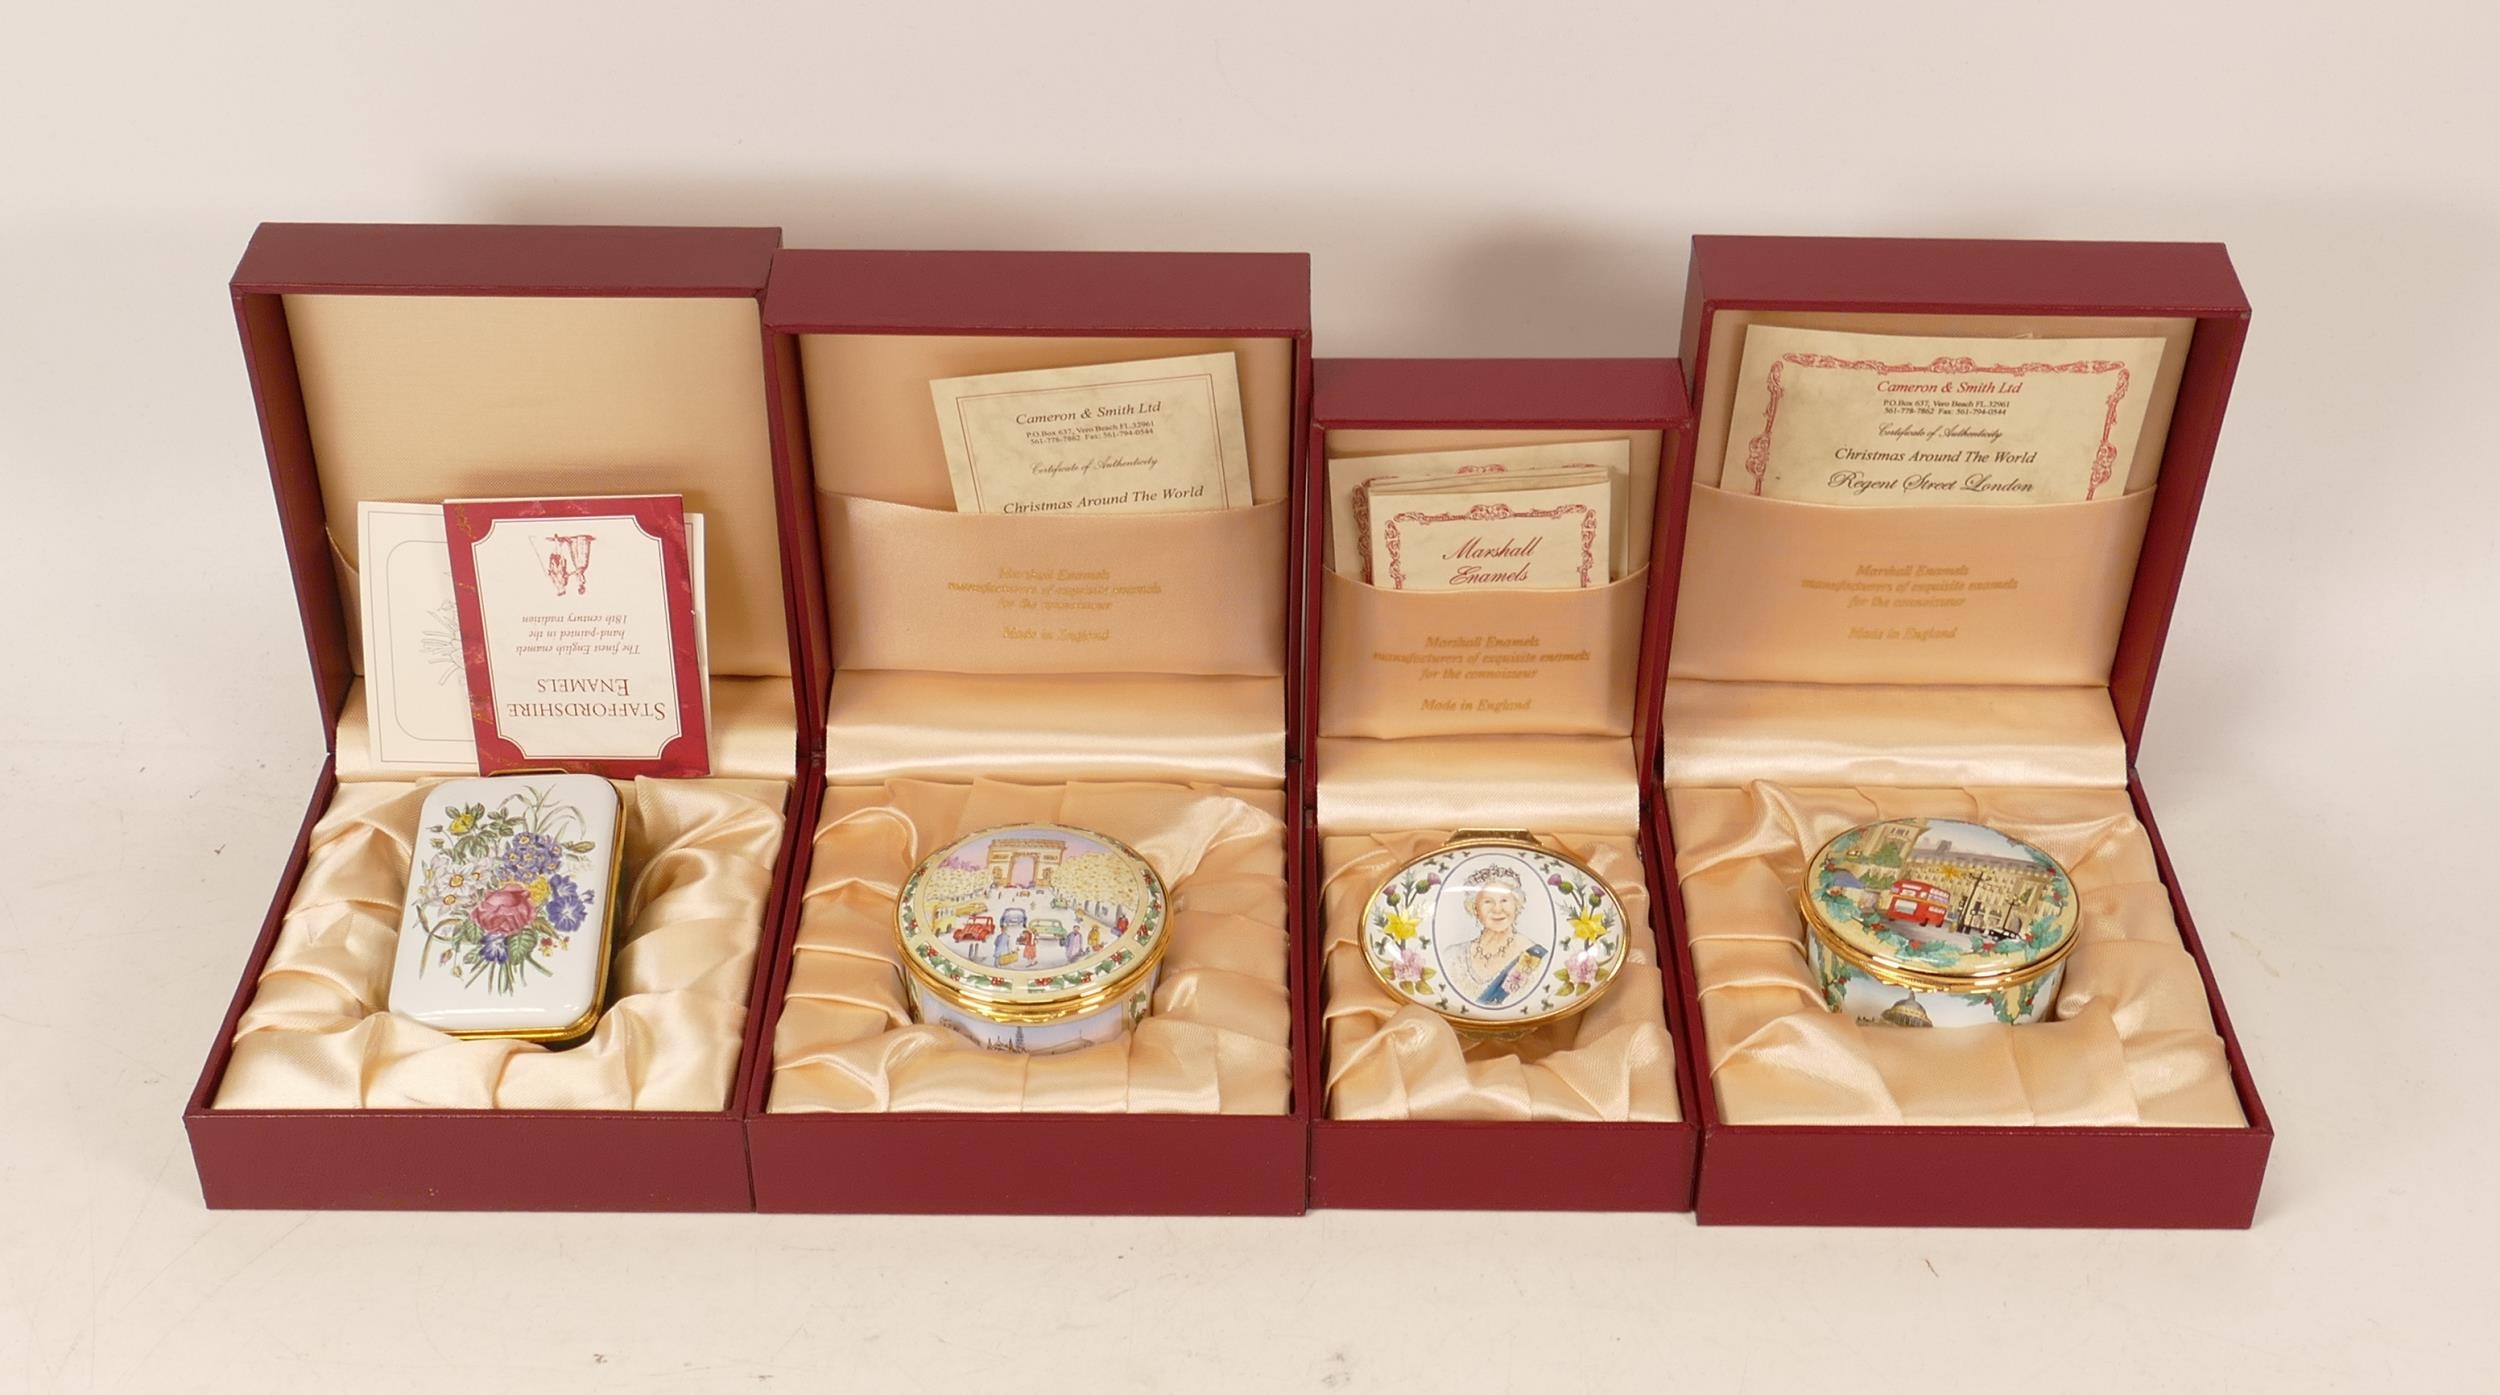 Four limited edition Marshall Enamels to include Her Majesty Queen Elizabeth The Queen Mother 27/